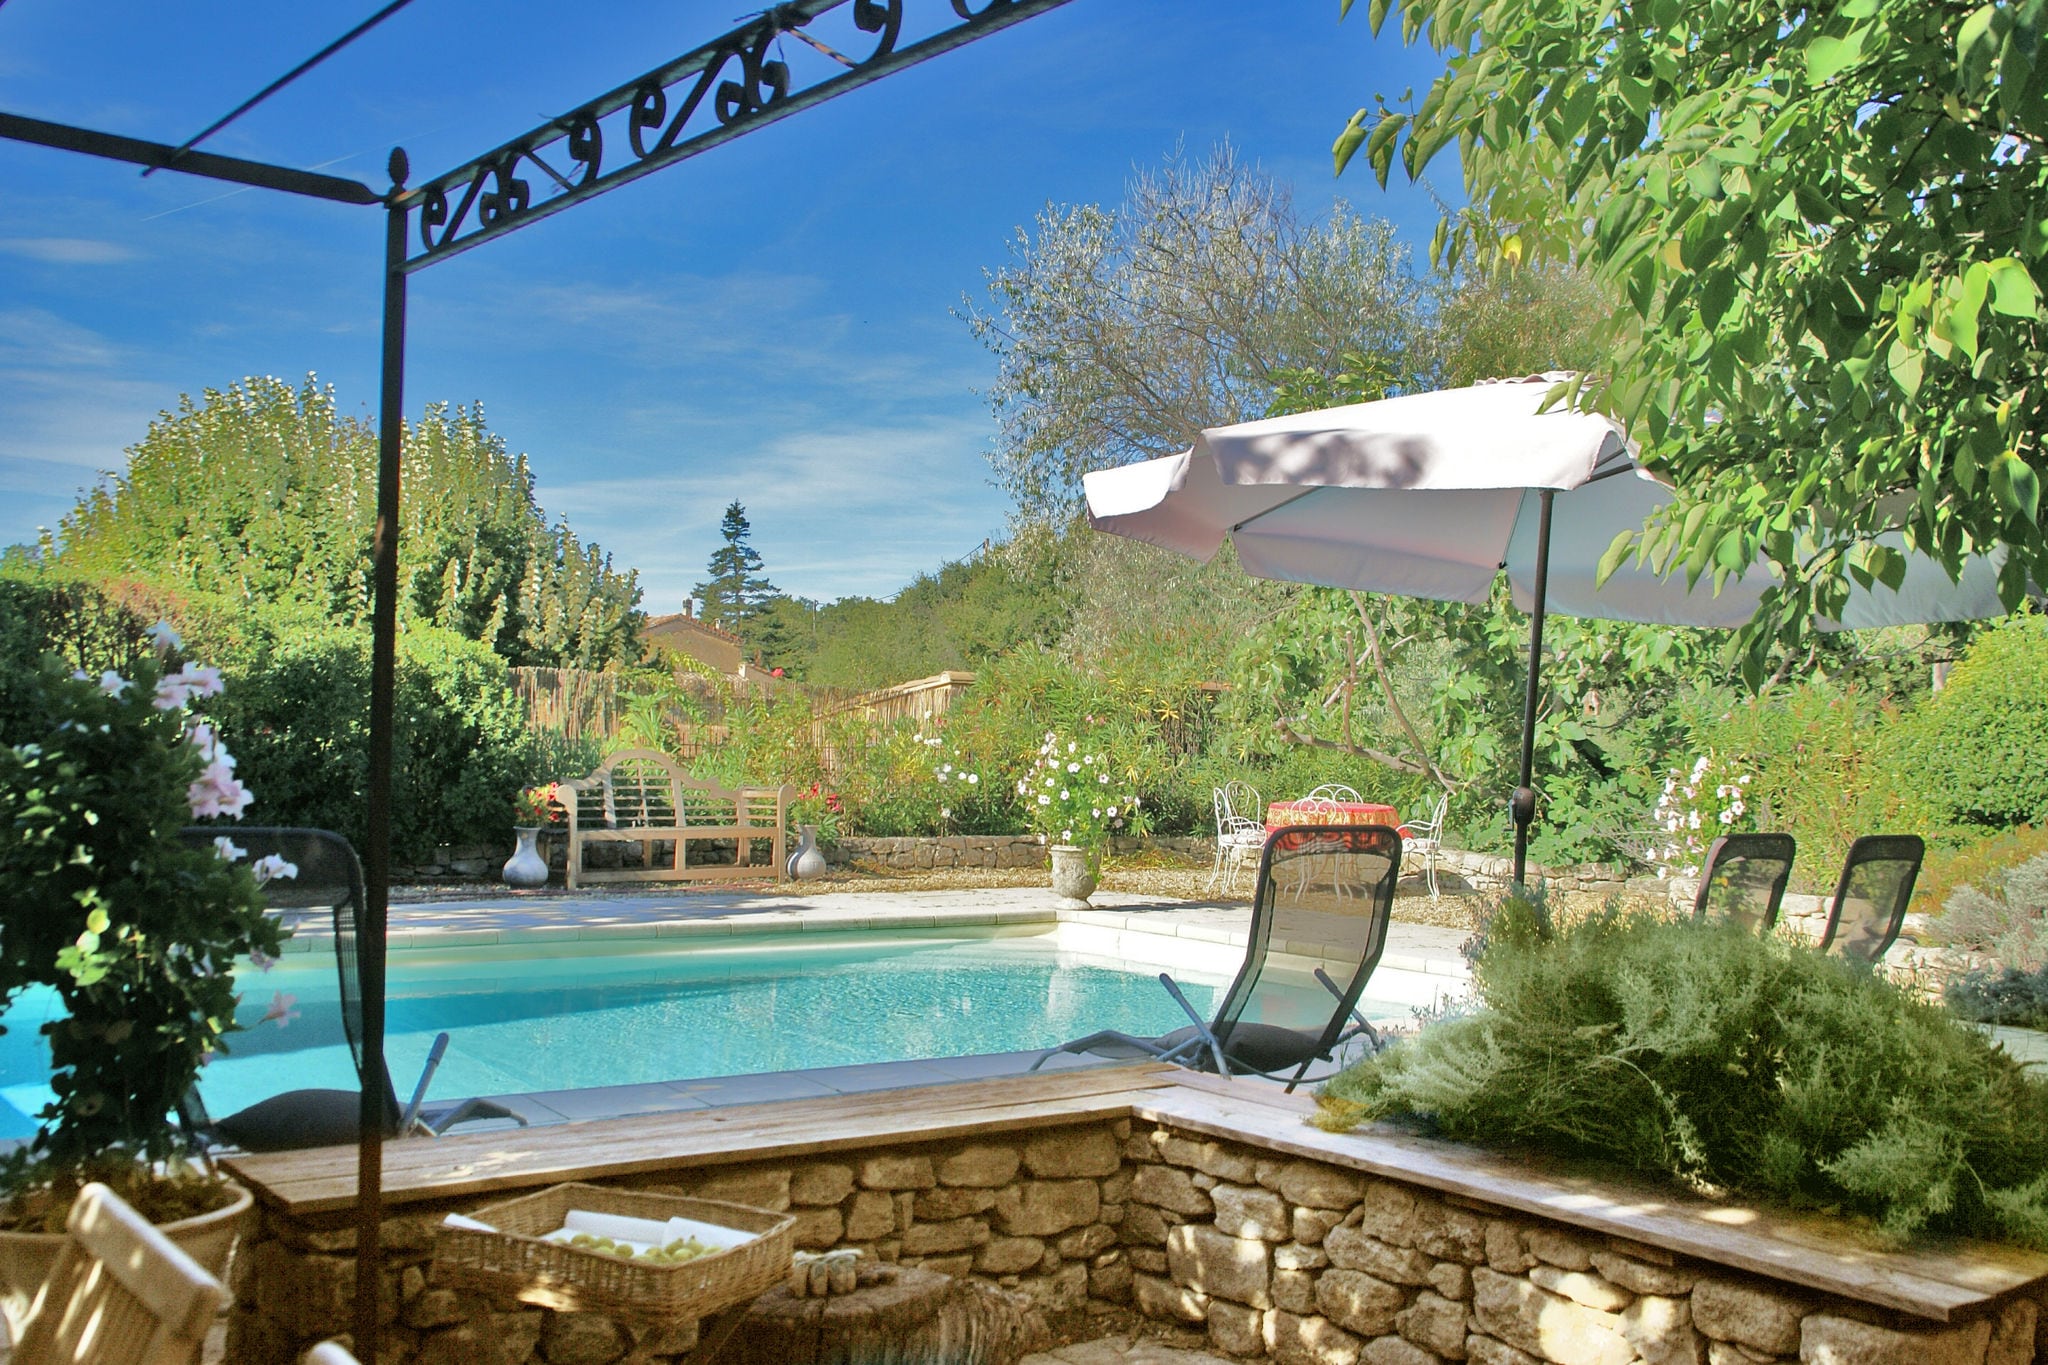 Stylish villa with private pool in the middle of a village in the beautiful Luberon